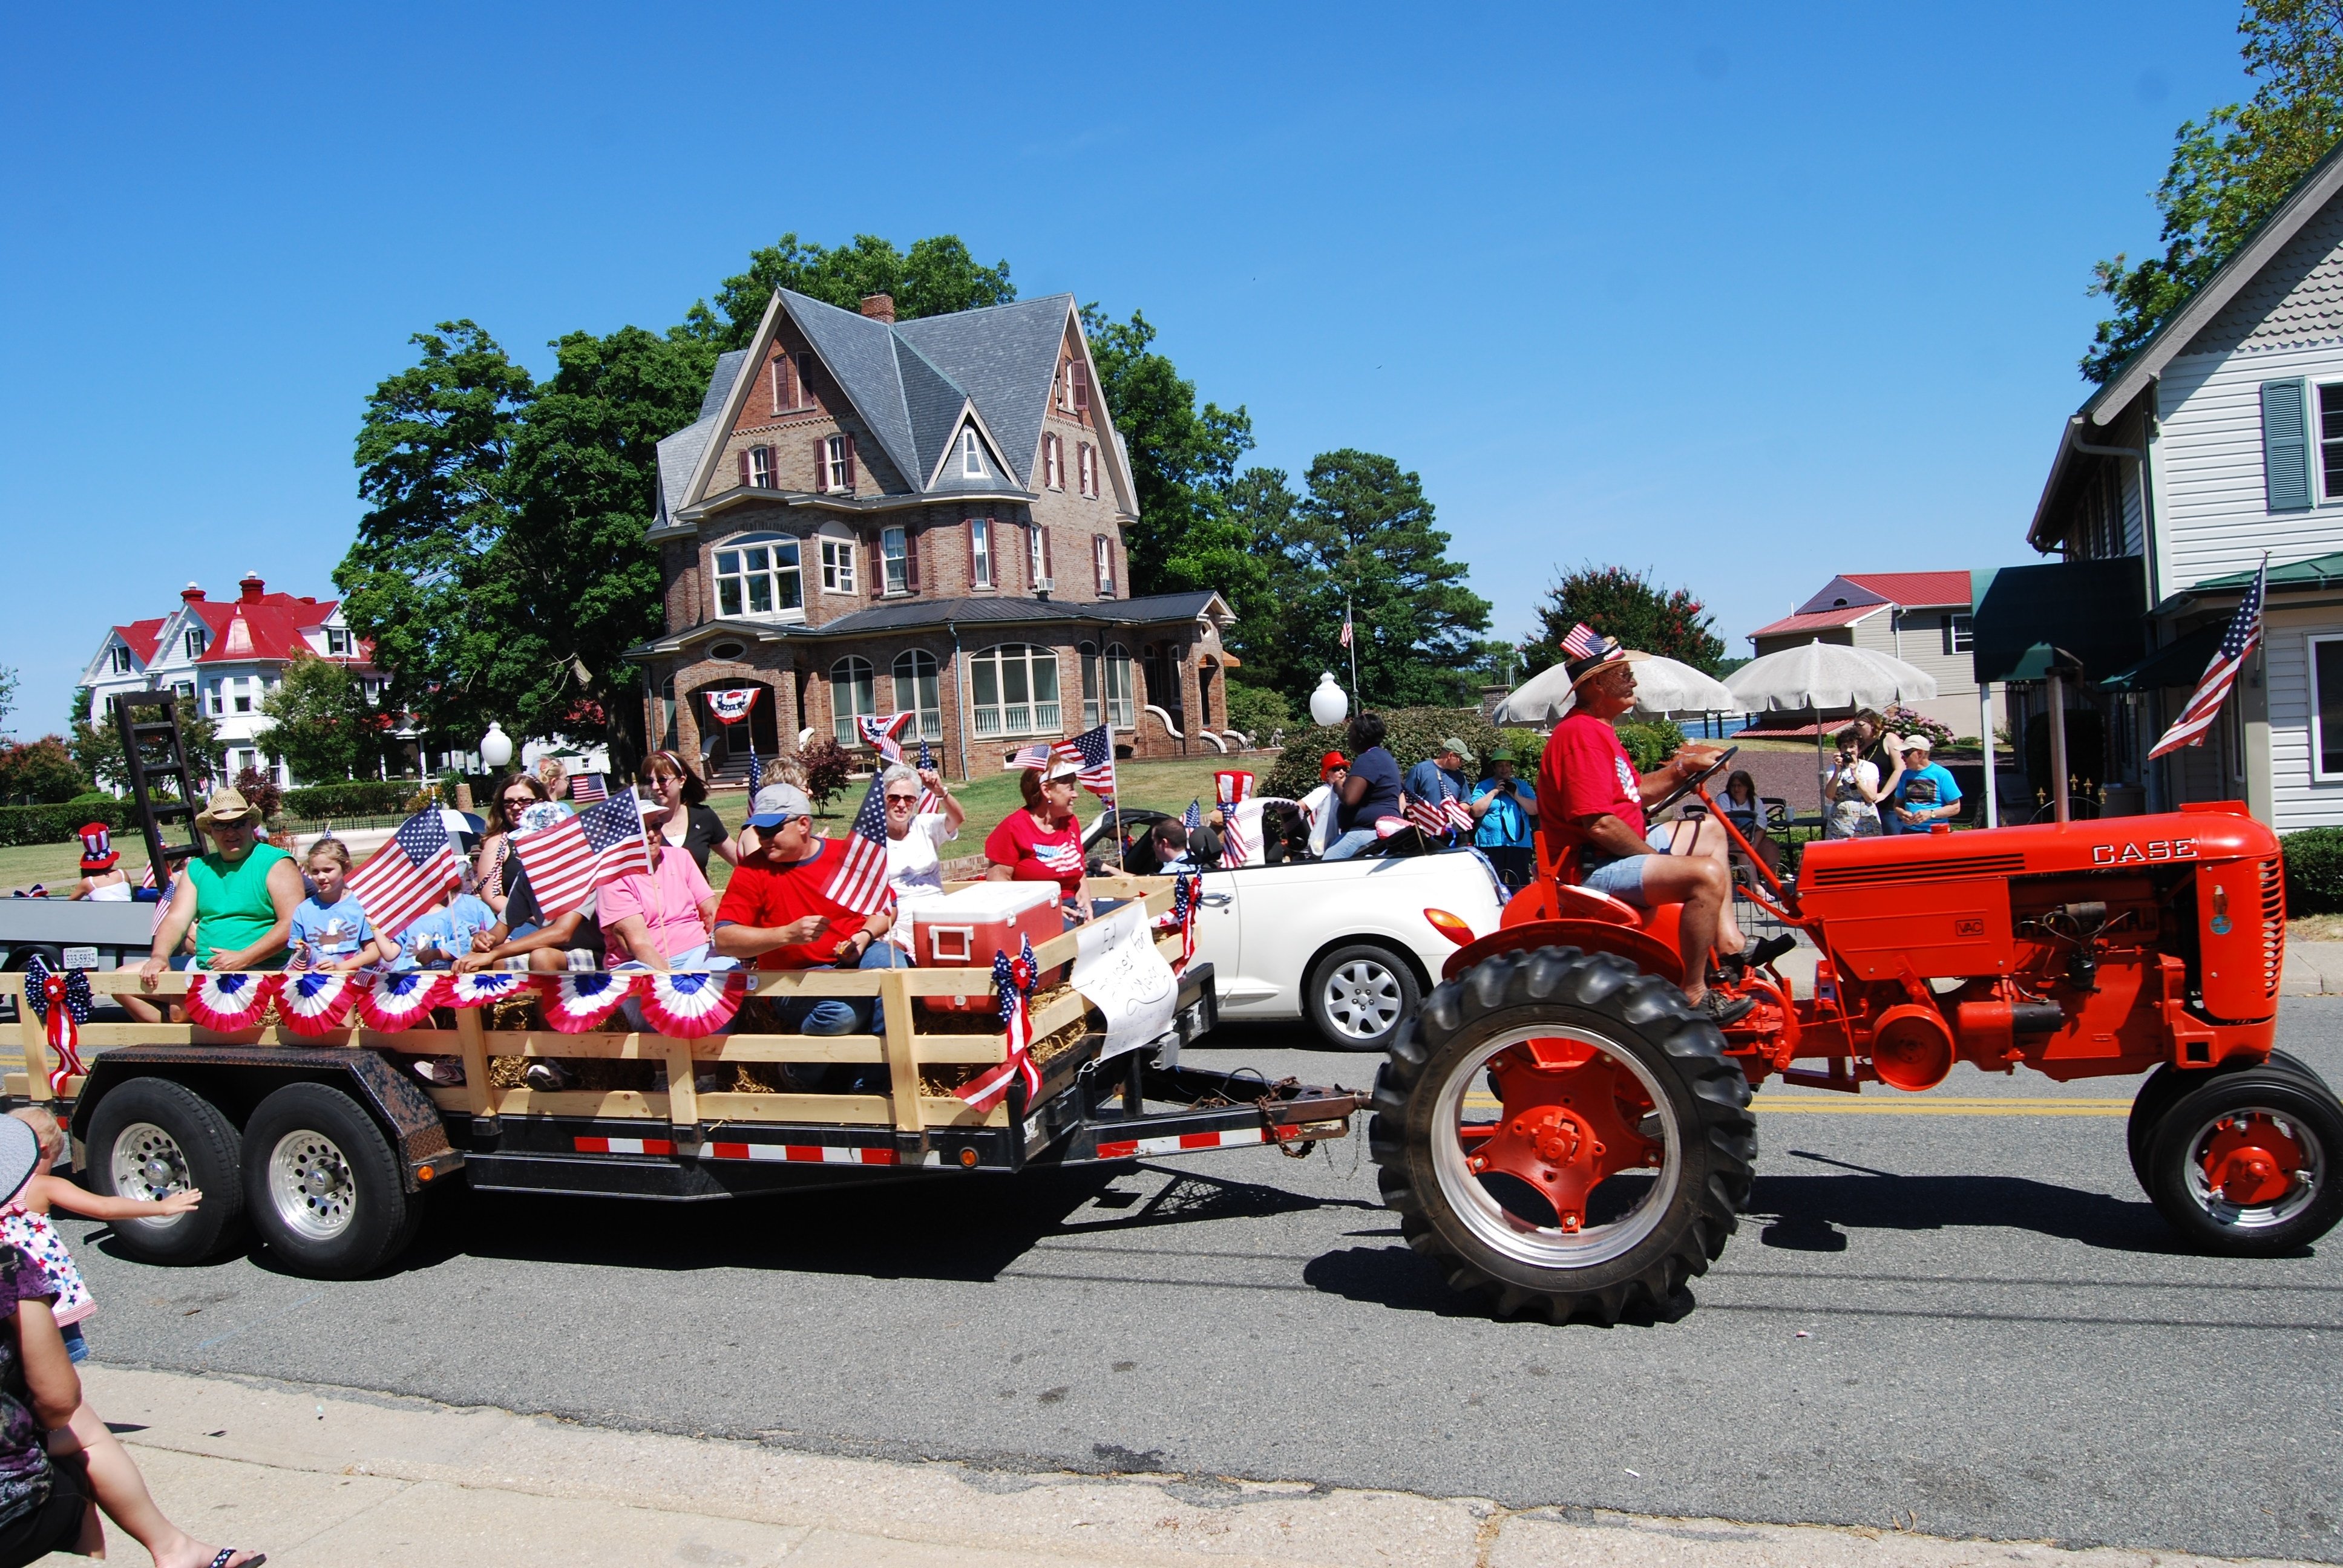 10 Fantastic 4Th Of July Parade Float Ideas 4th of july parade floats on the day of reedville fourth of july 2022